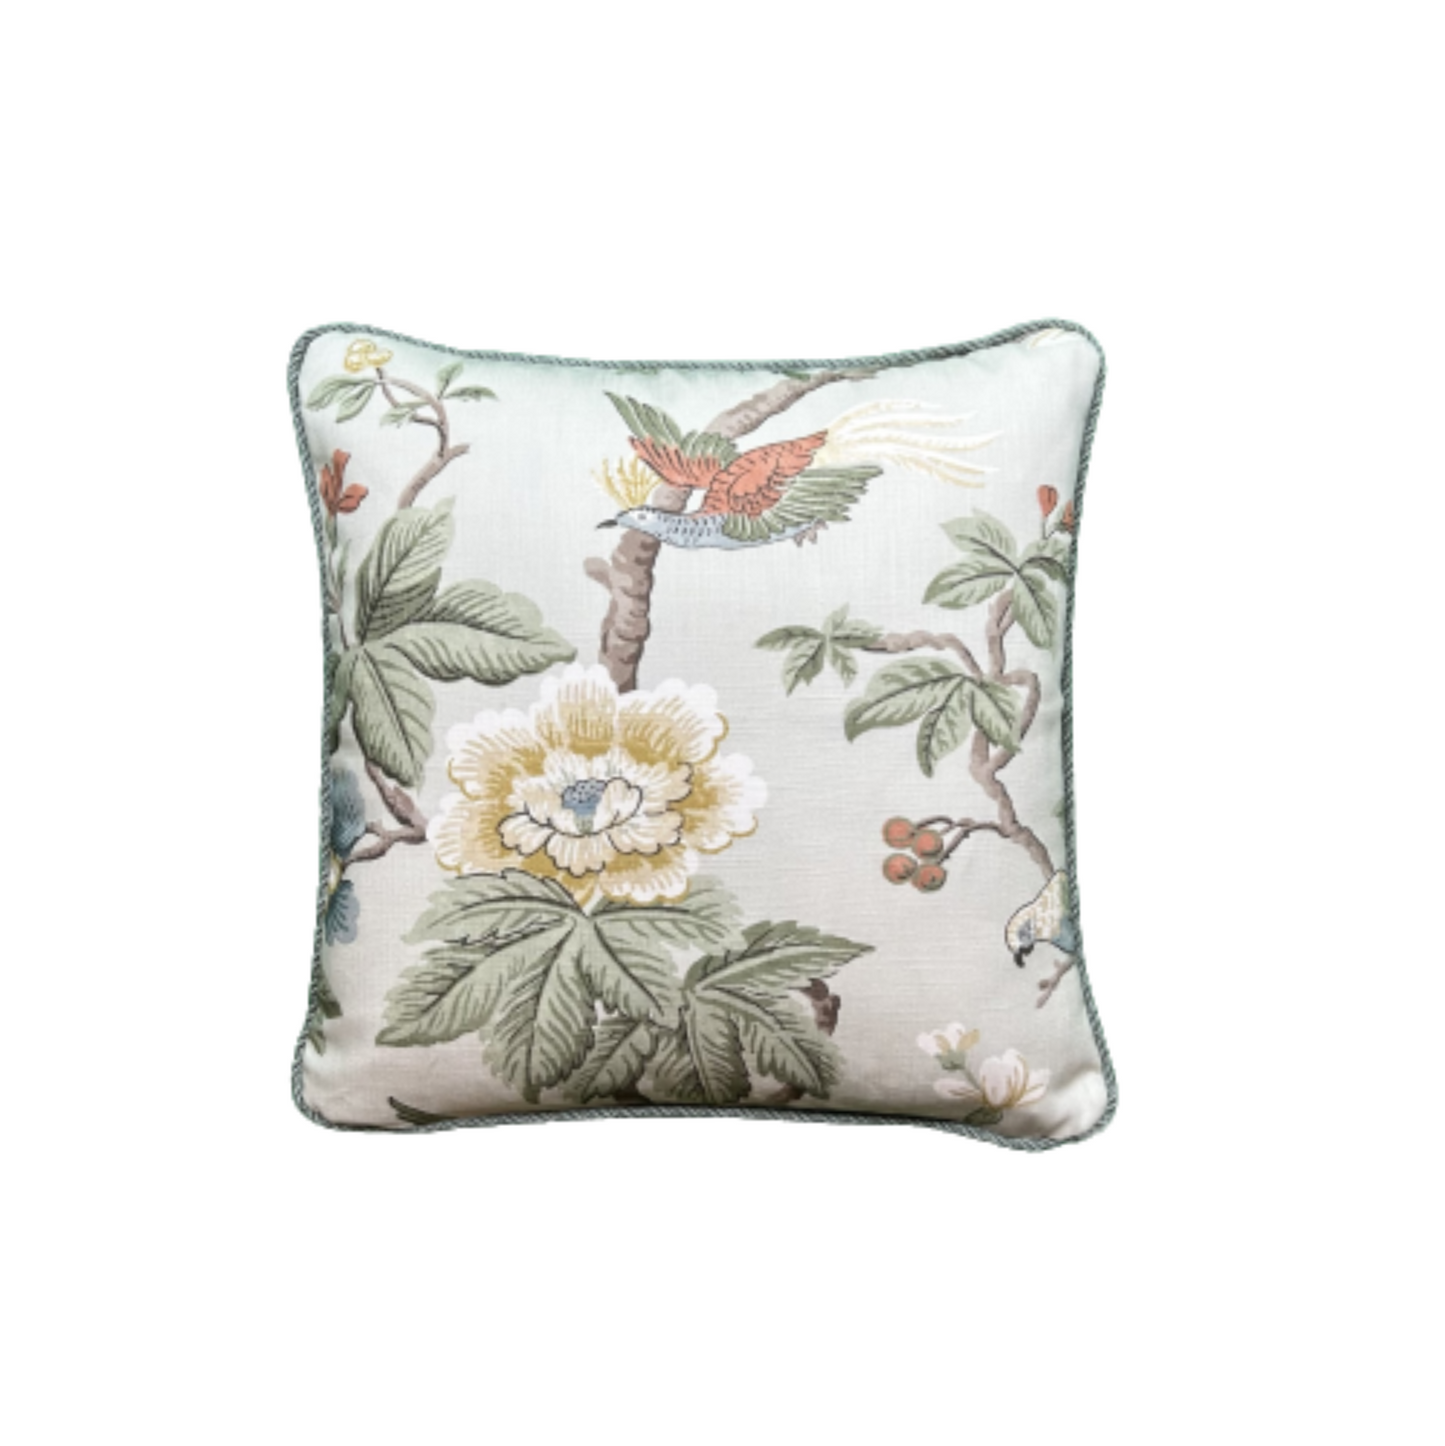 Lophura British National Trust 18 x 18 Decorative Pillow with Down Feather Insert